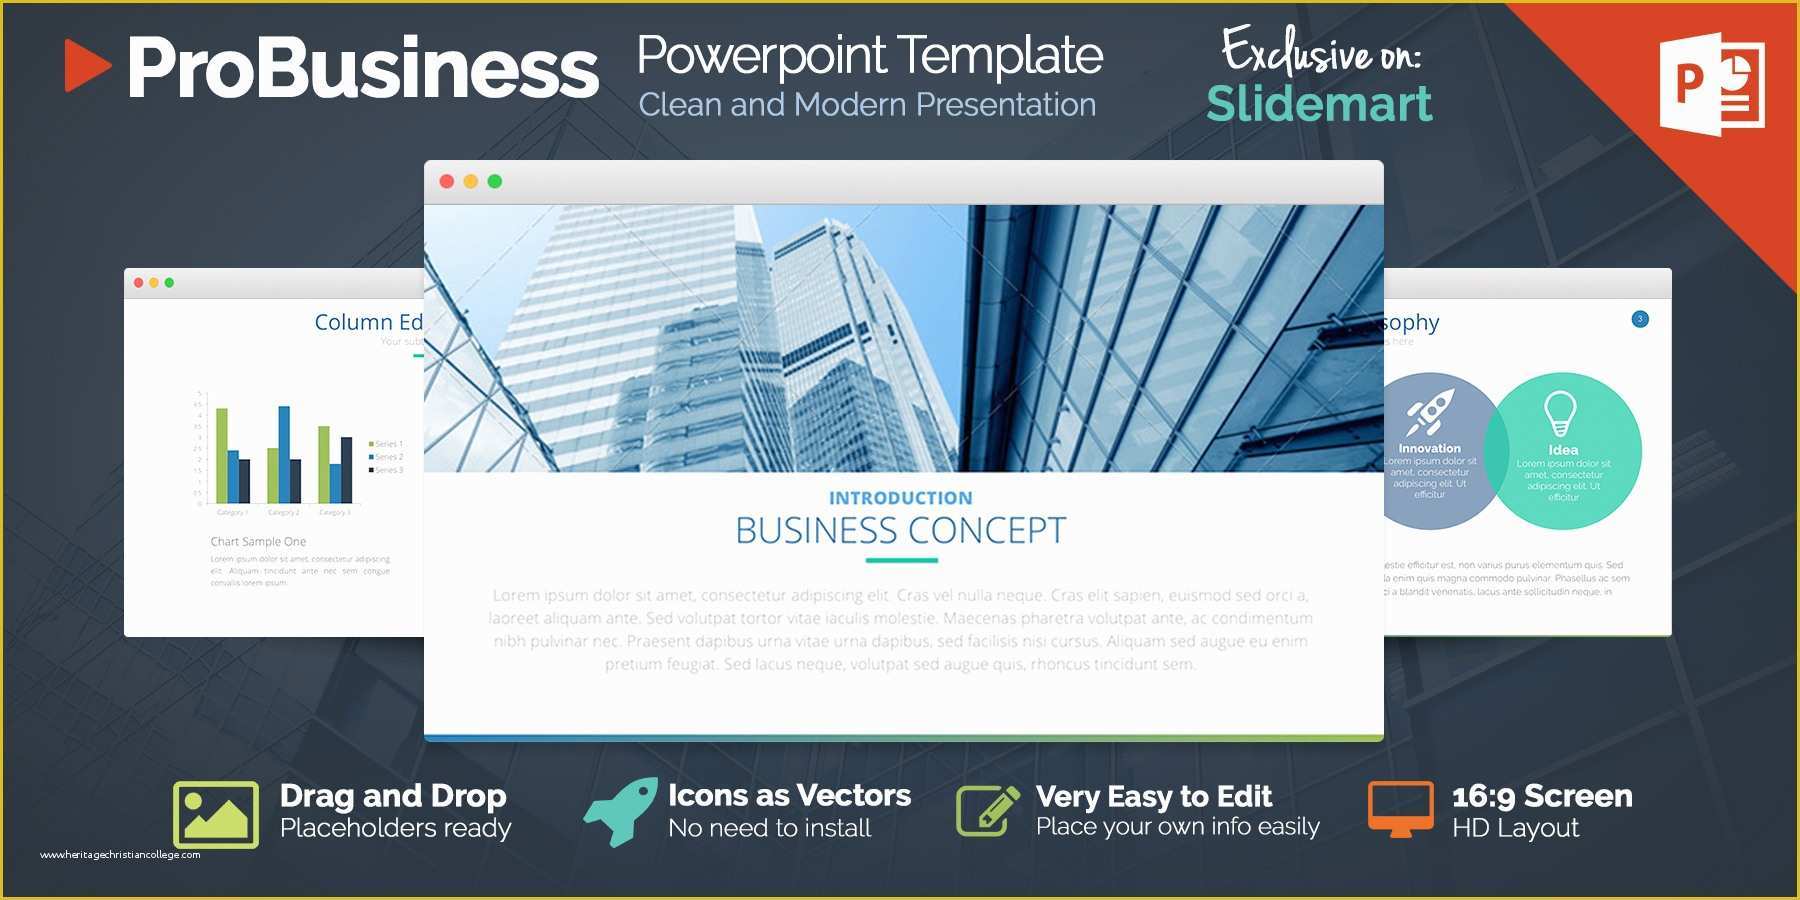 Free Powerpoint Slide Templates Of the Best 8 Free Powerpoint Templates